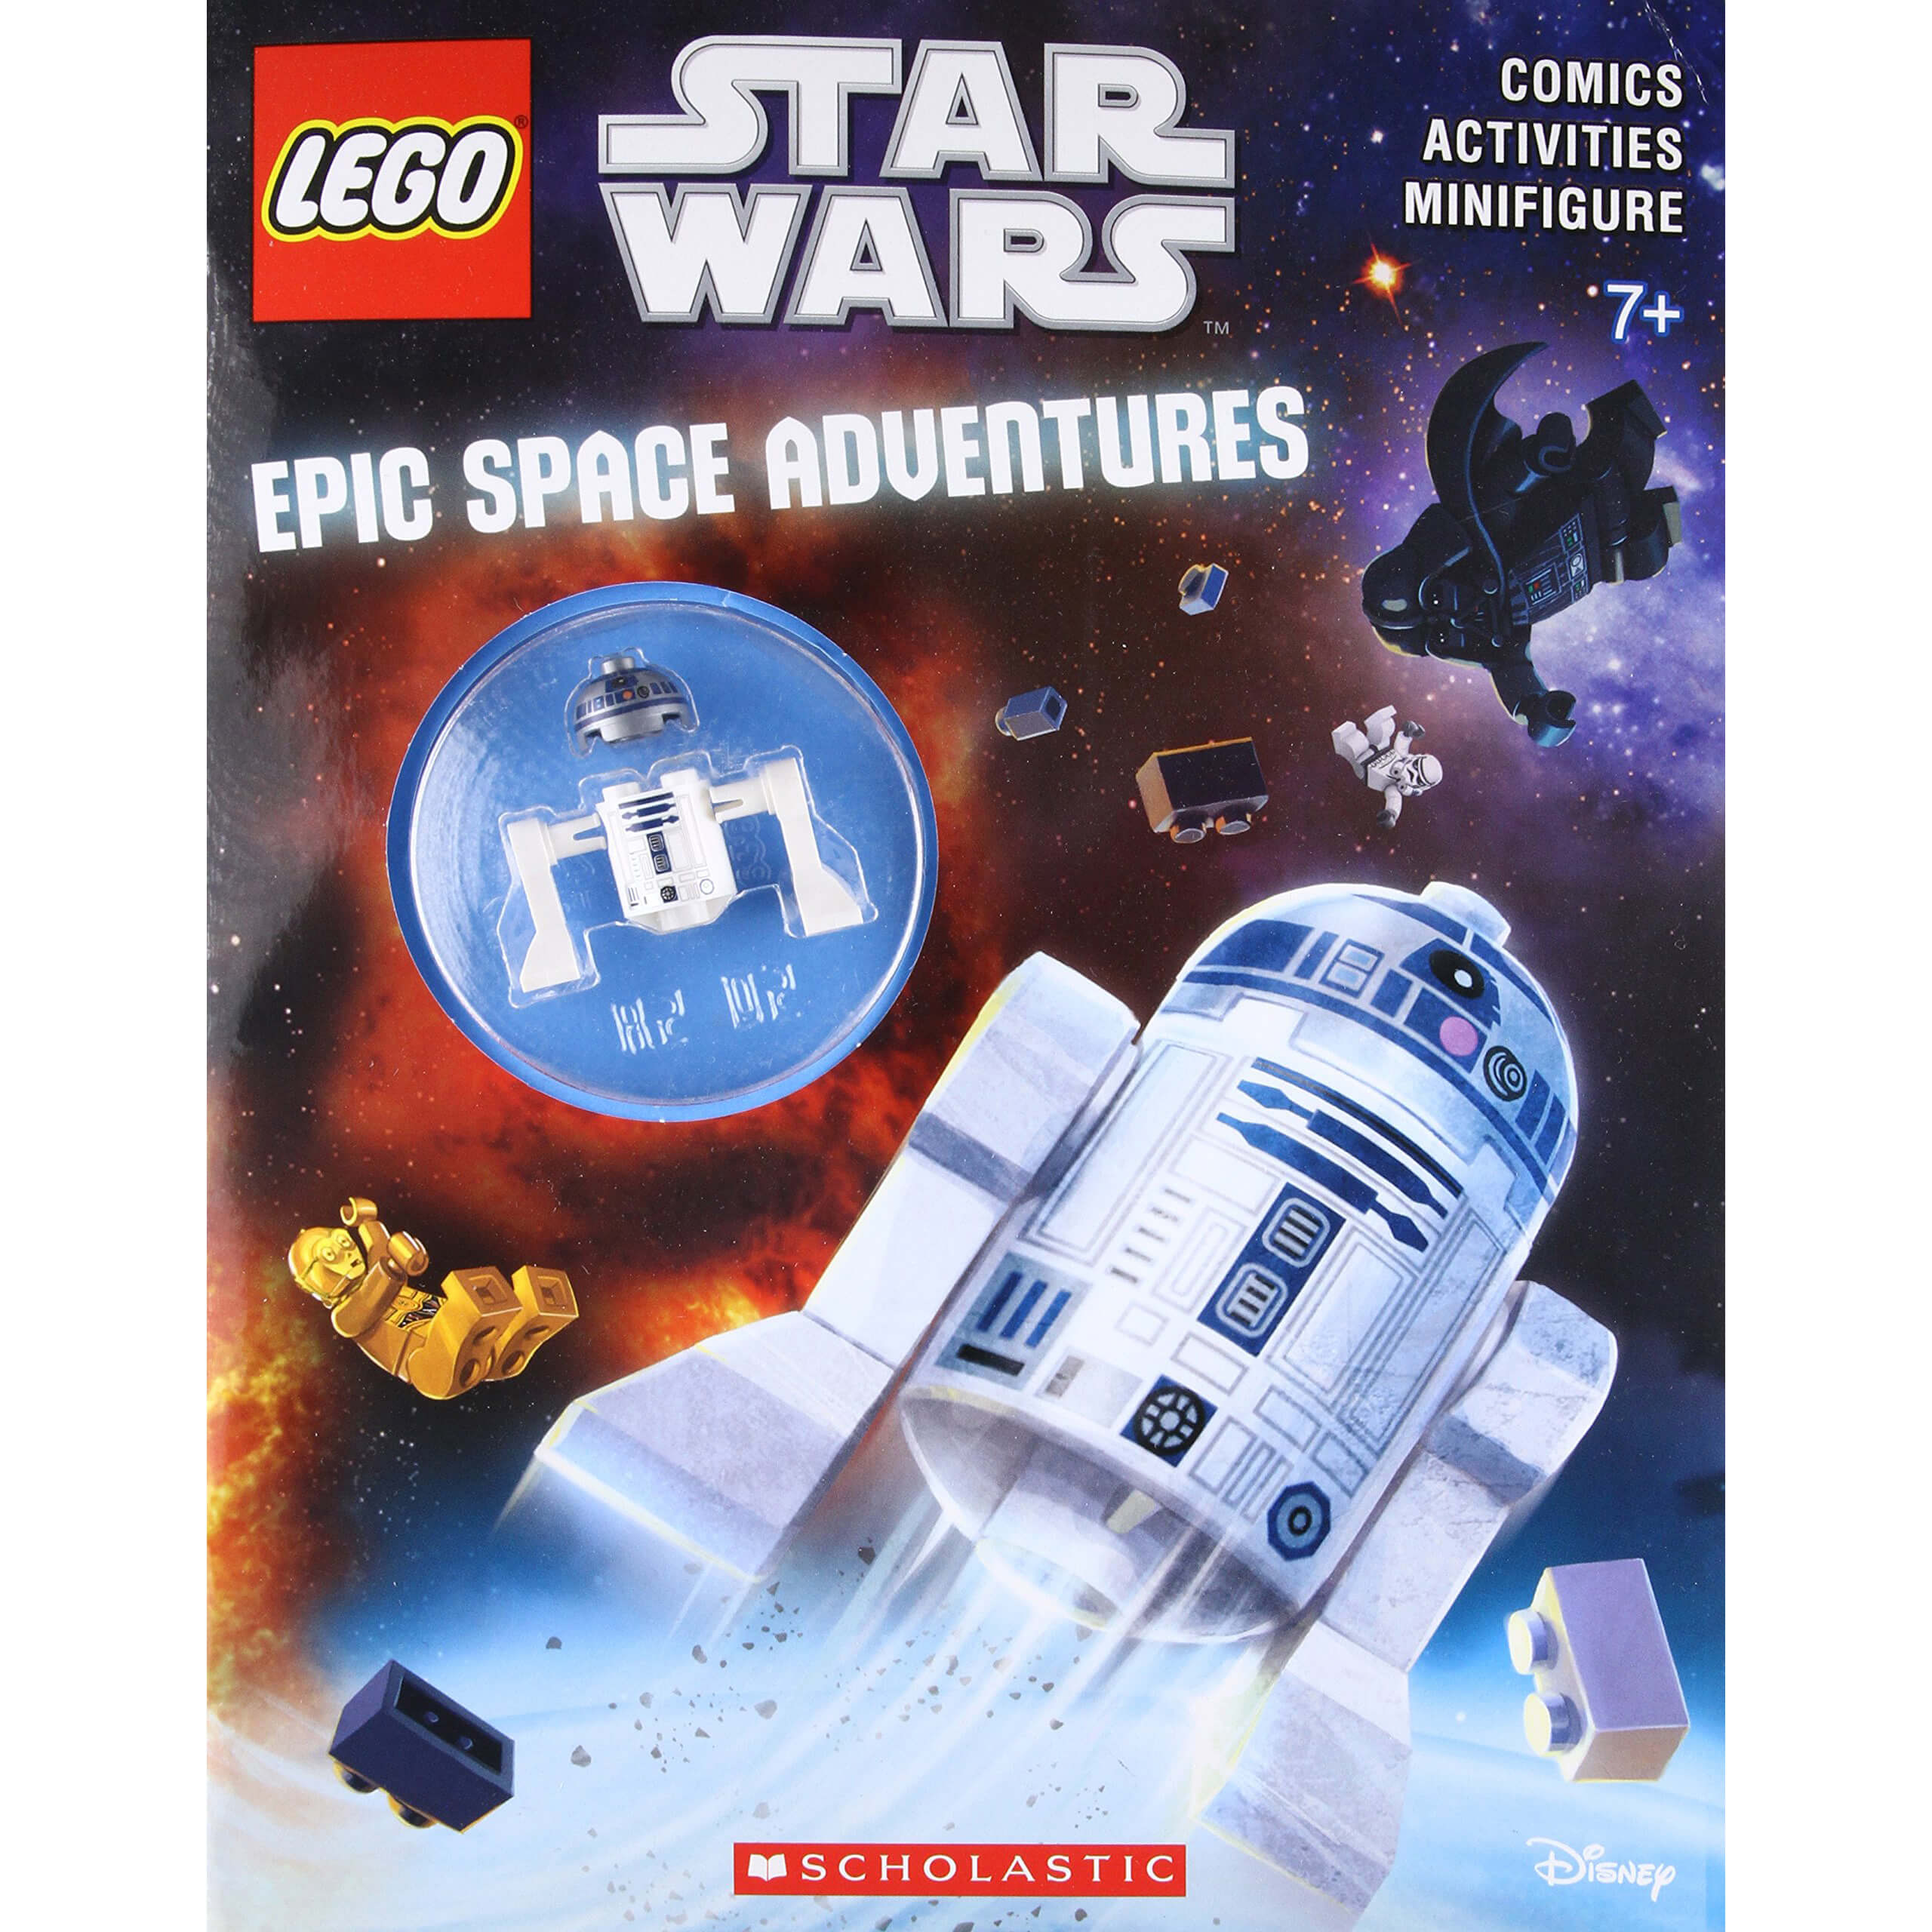 LEGO Star Wars: Epic Space Adventures with Minifigure